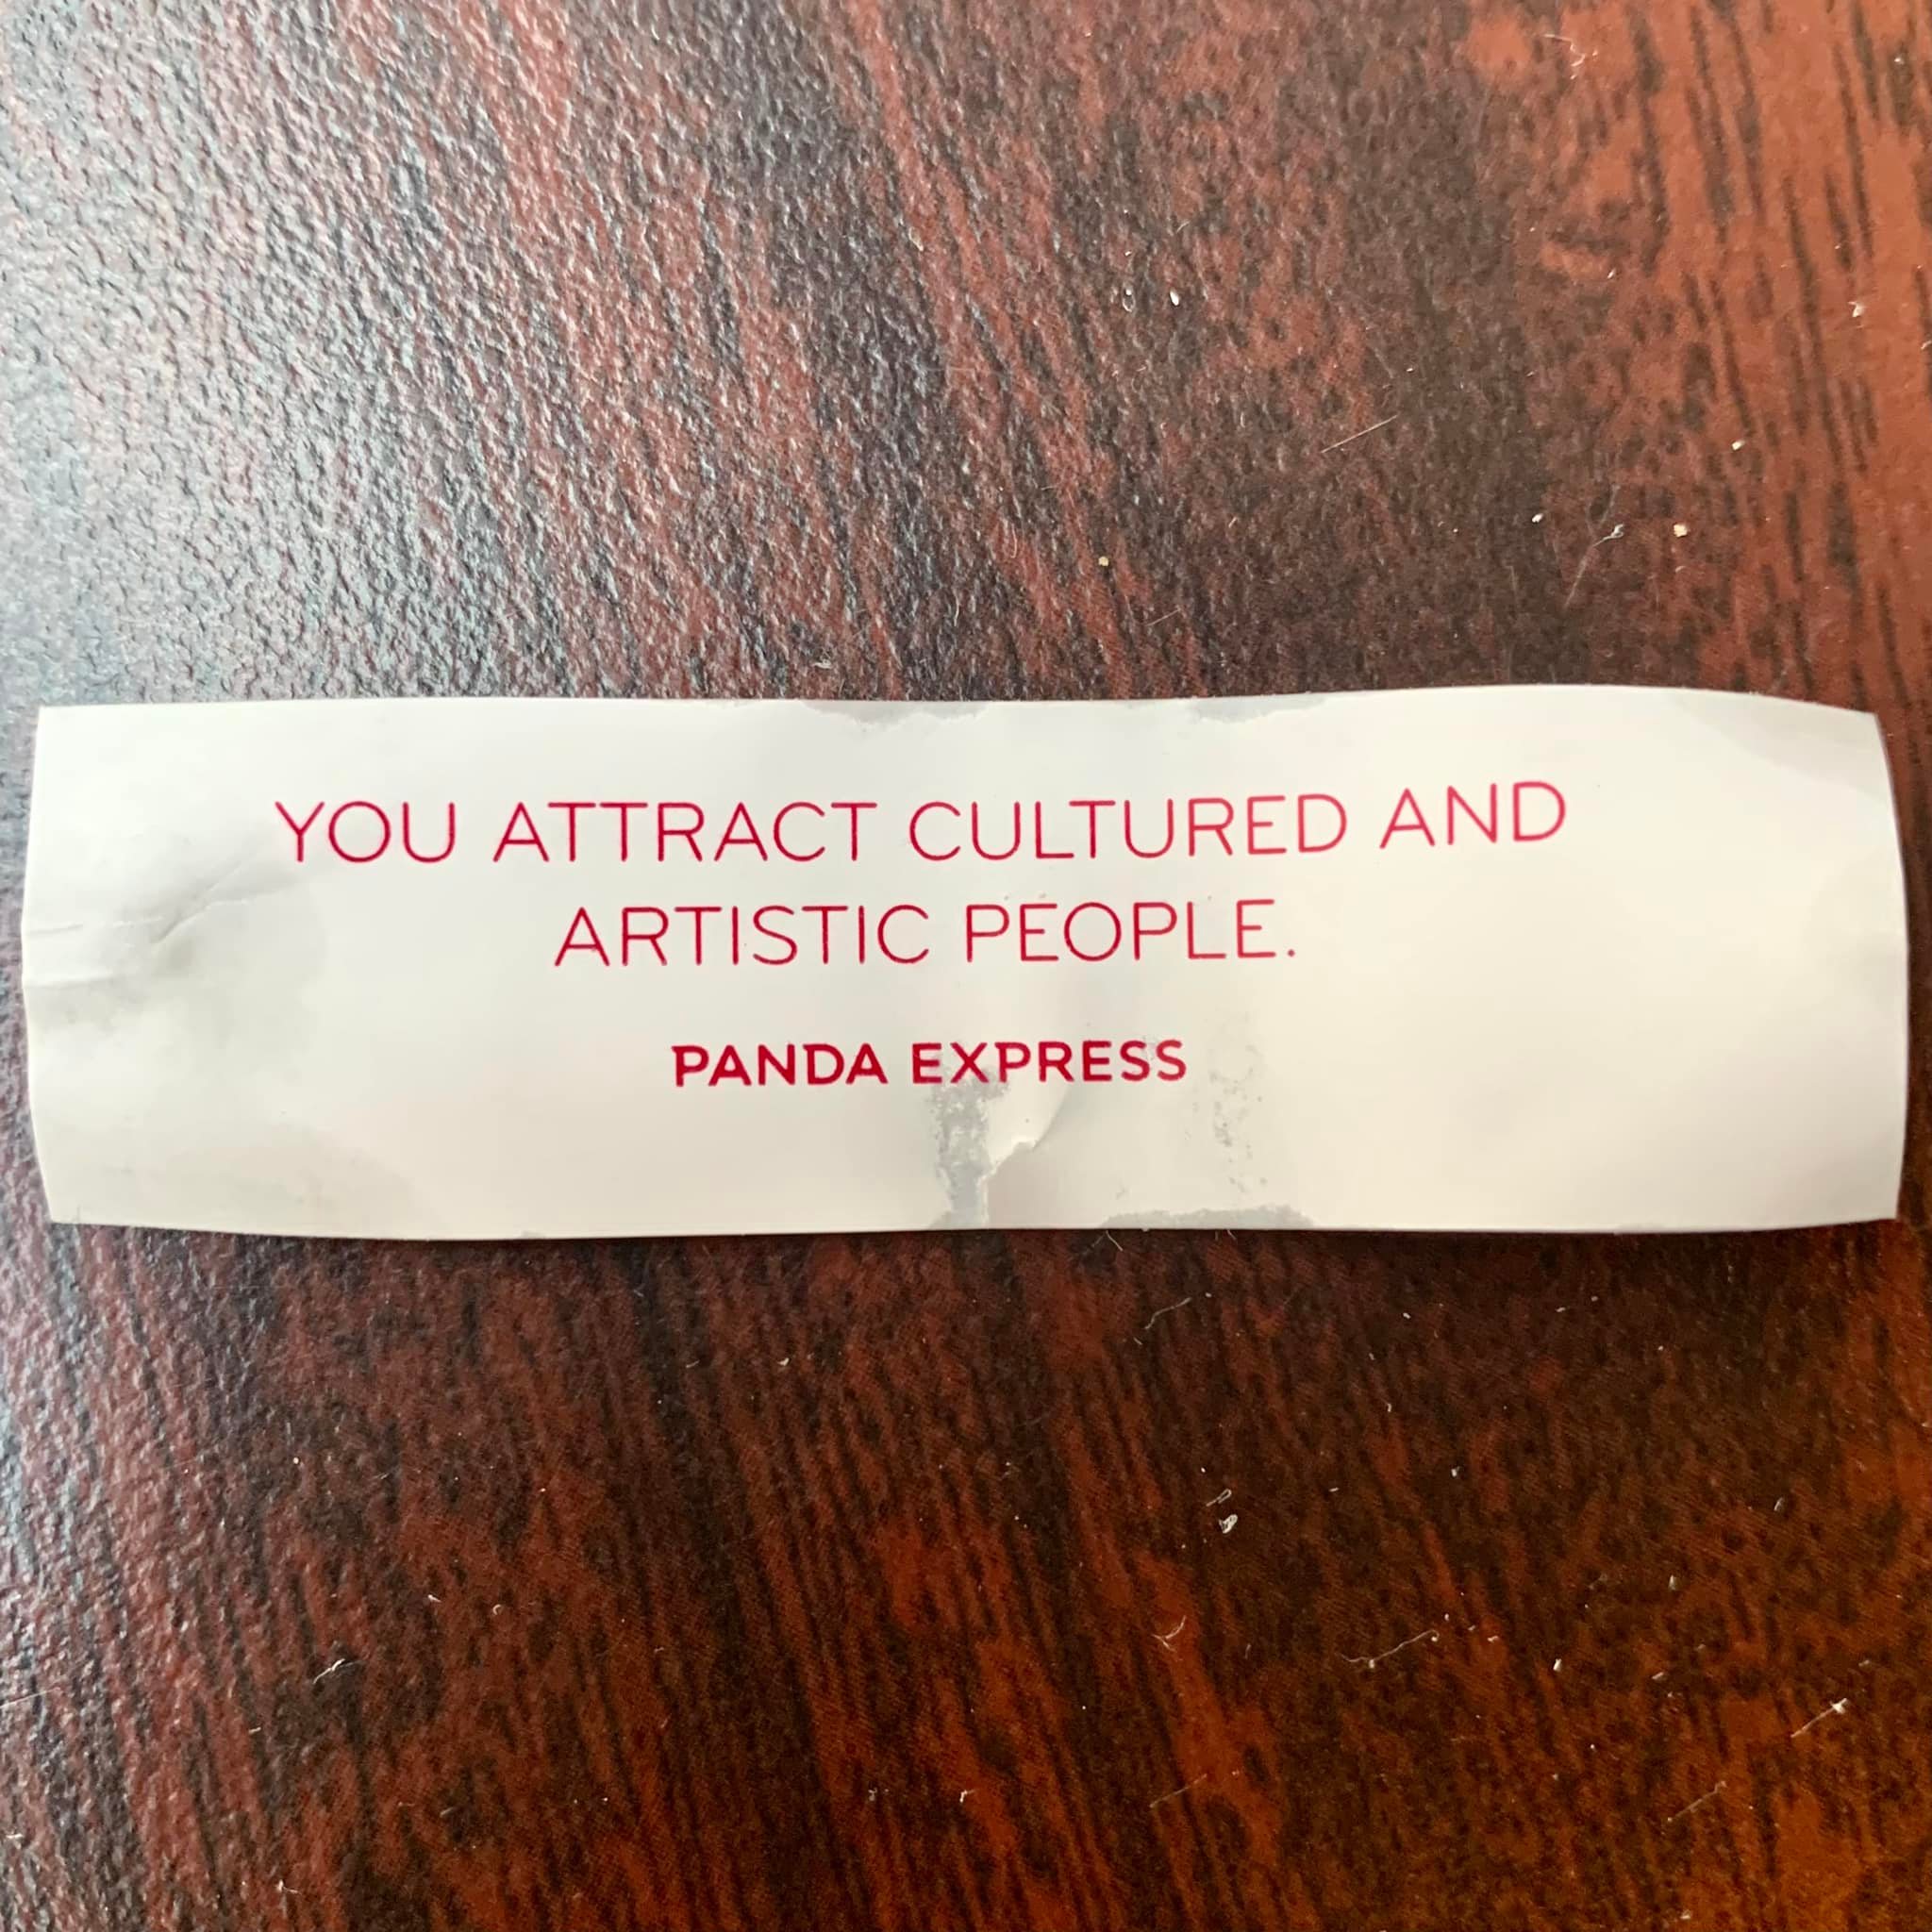 Dear readers: Your cultured and artistic status was confirmed today by a fortune cookie. Congratulations!